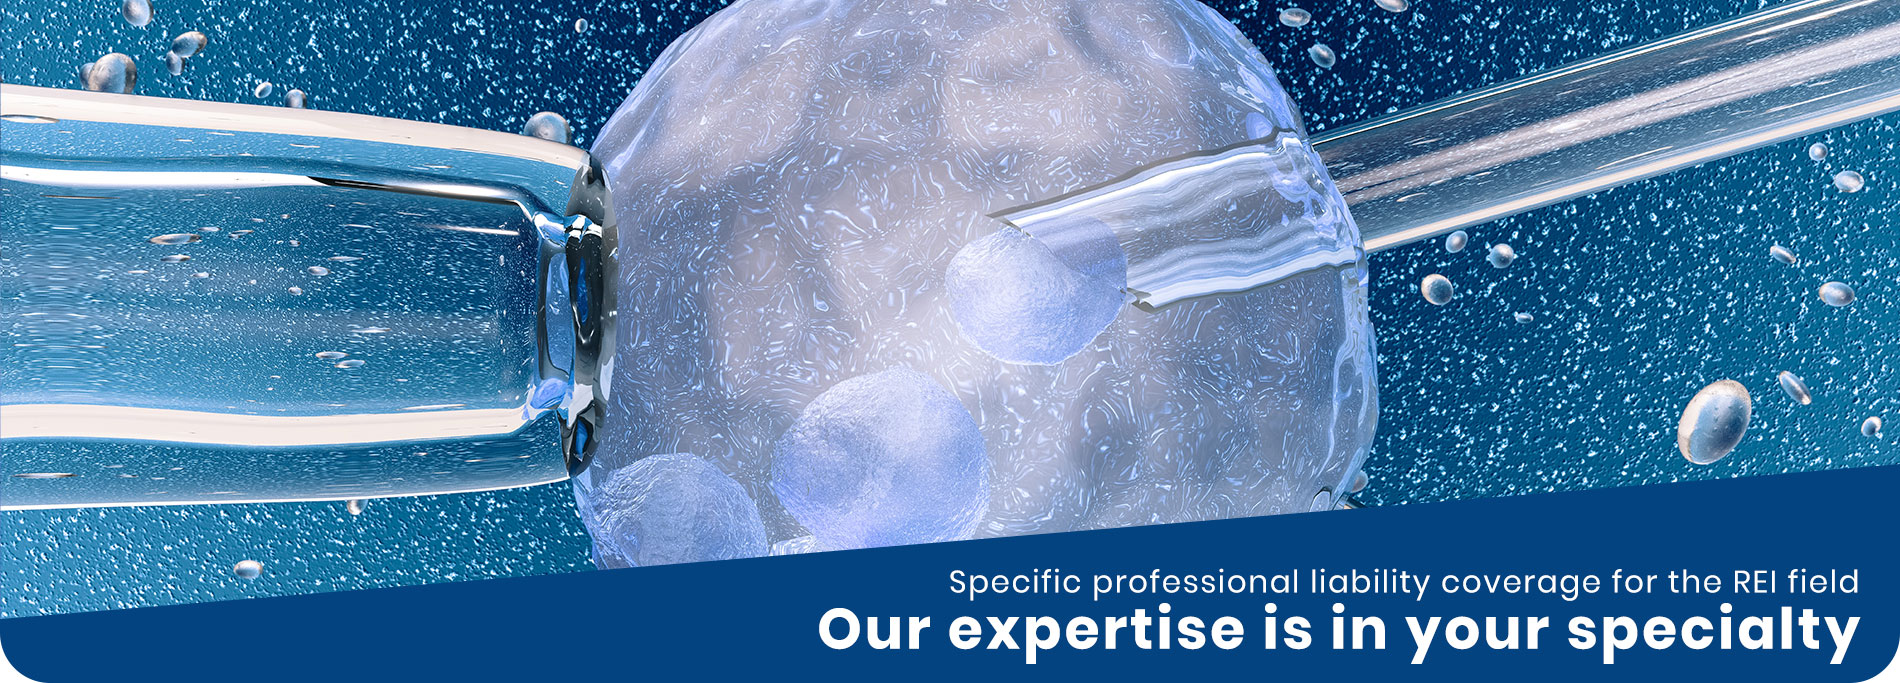 Specific professional liability coverage for the REI field - Our expertise is in your specialty